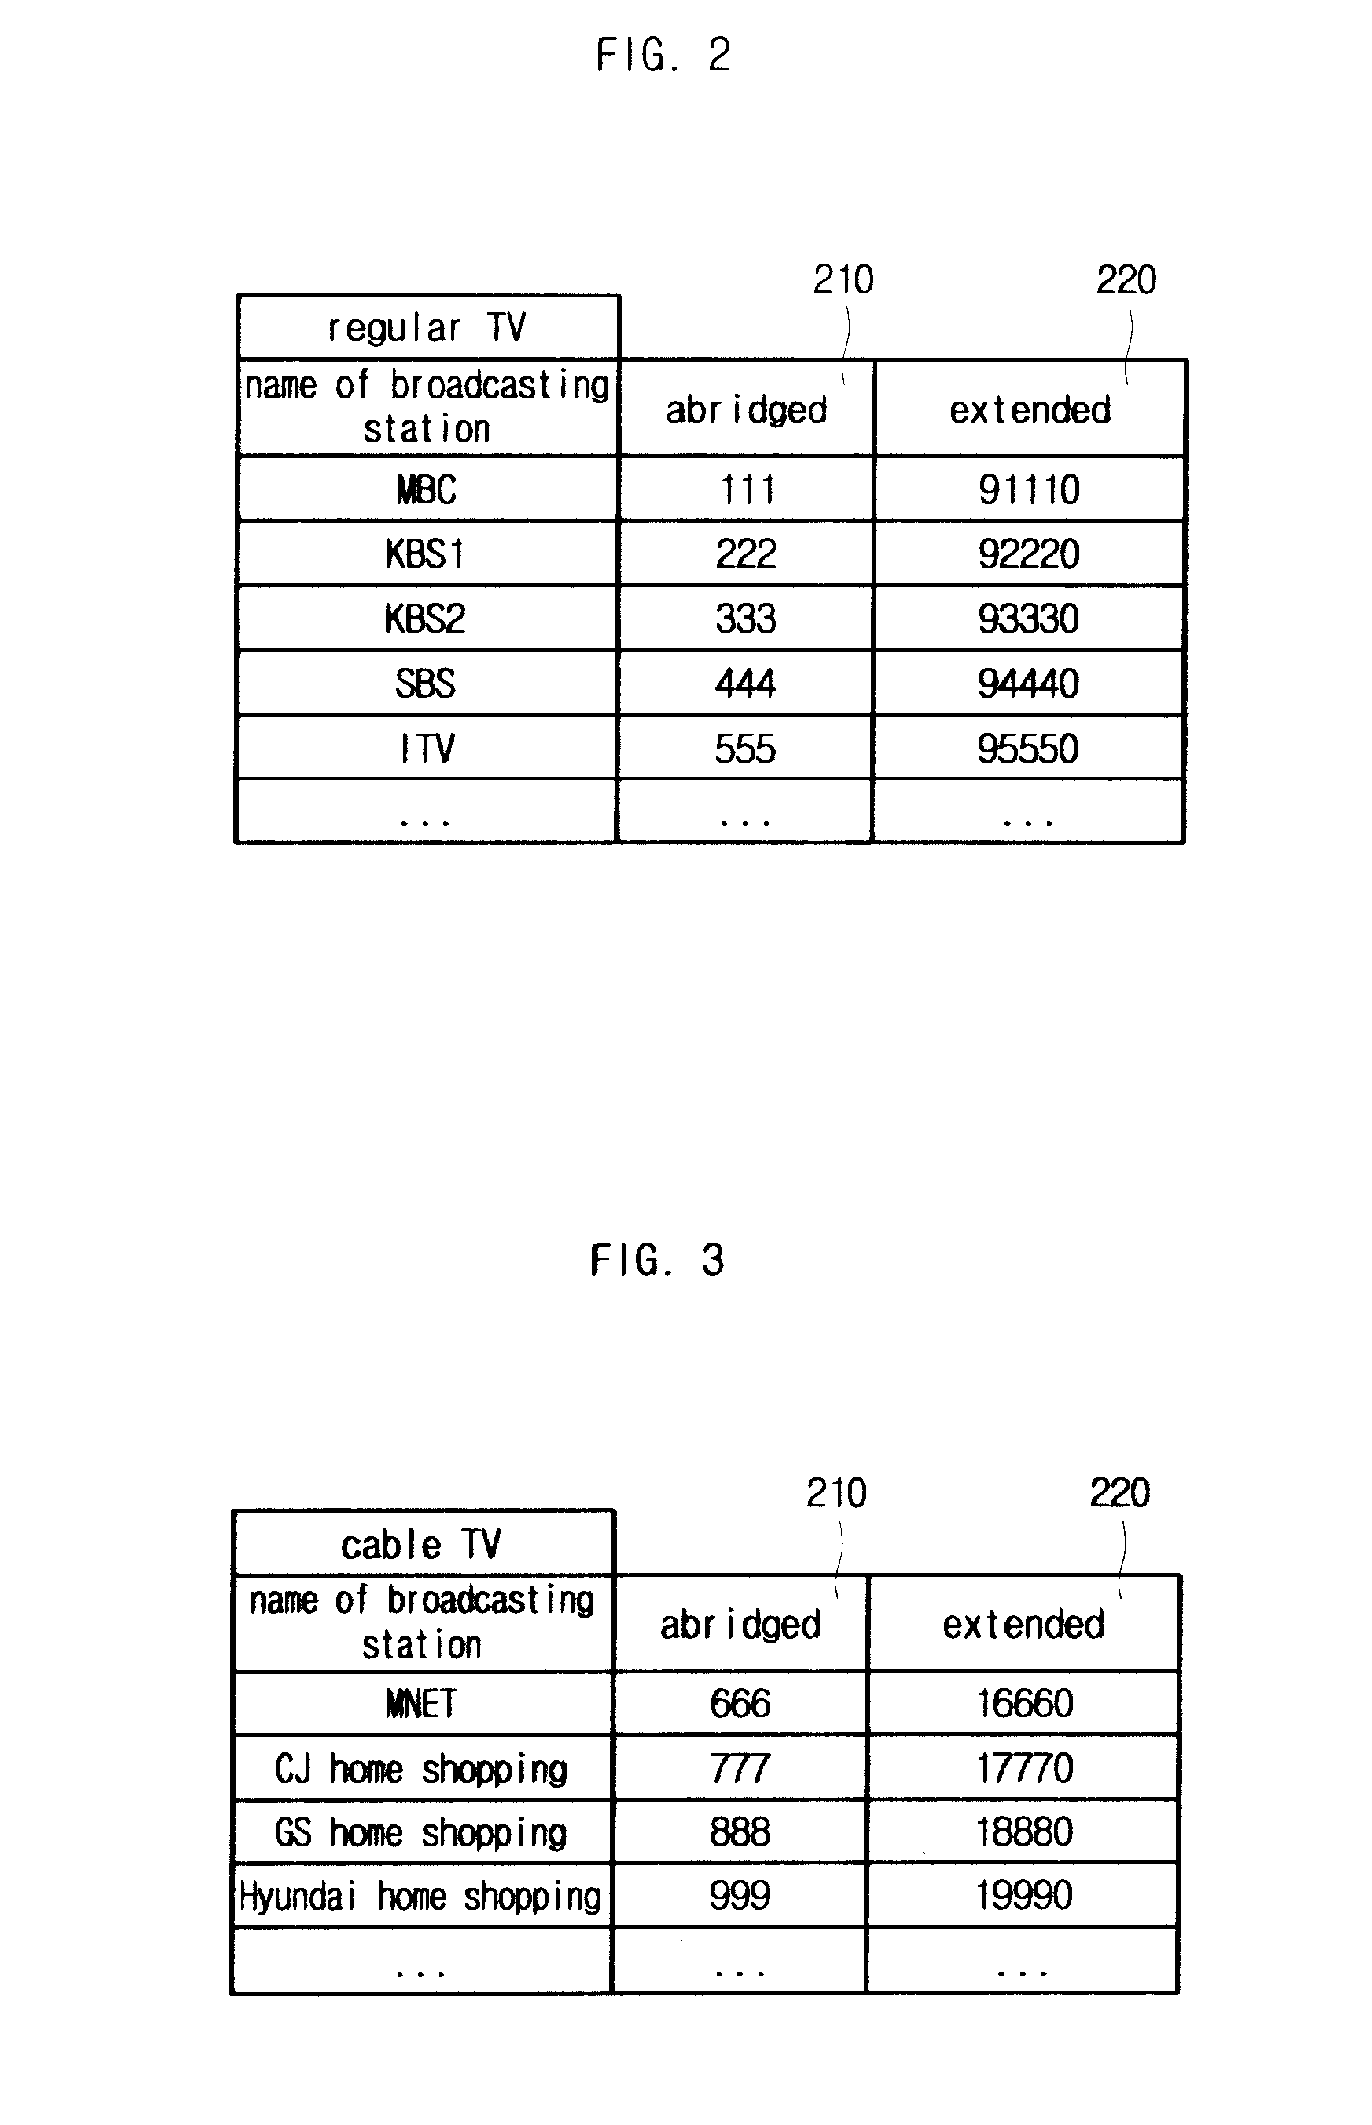 Method and Apparatus for Requesting Service Using Access Code